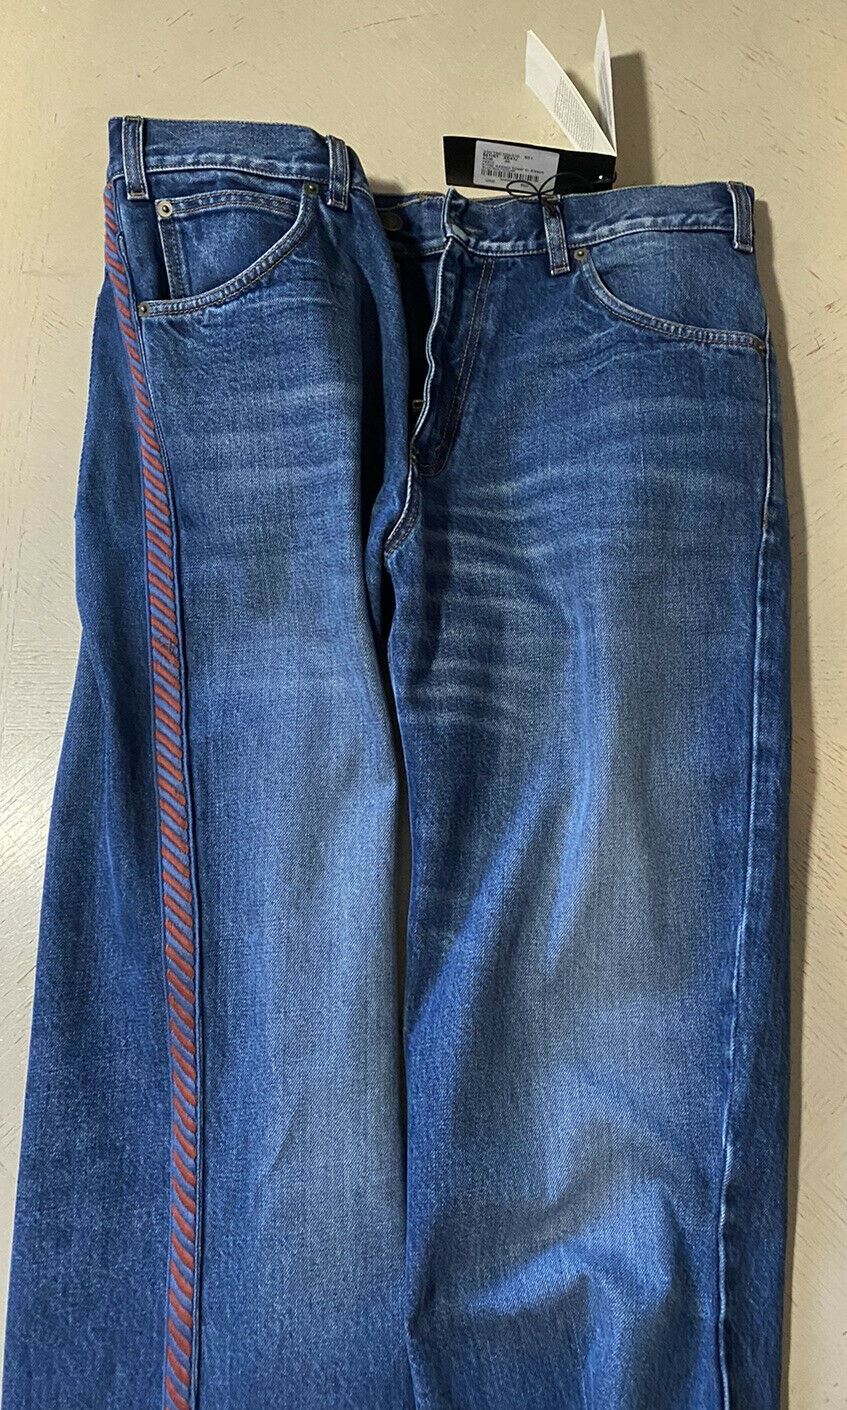 NWT $1200 Gucci Men’s Jeans Pants 36 US Italy